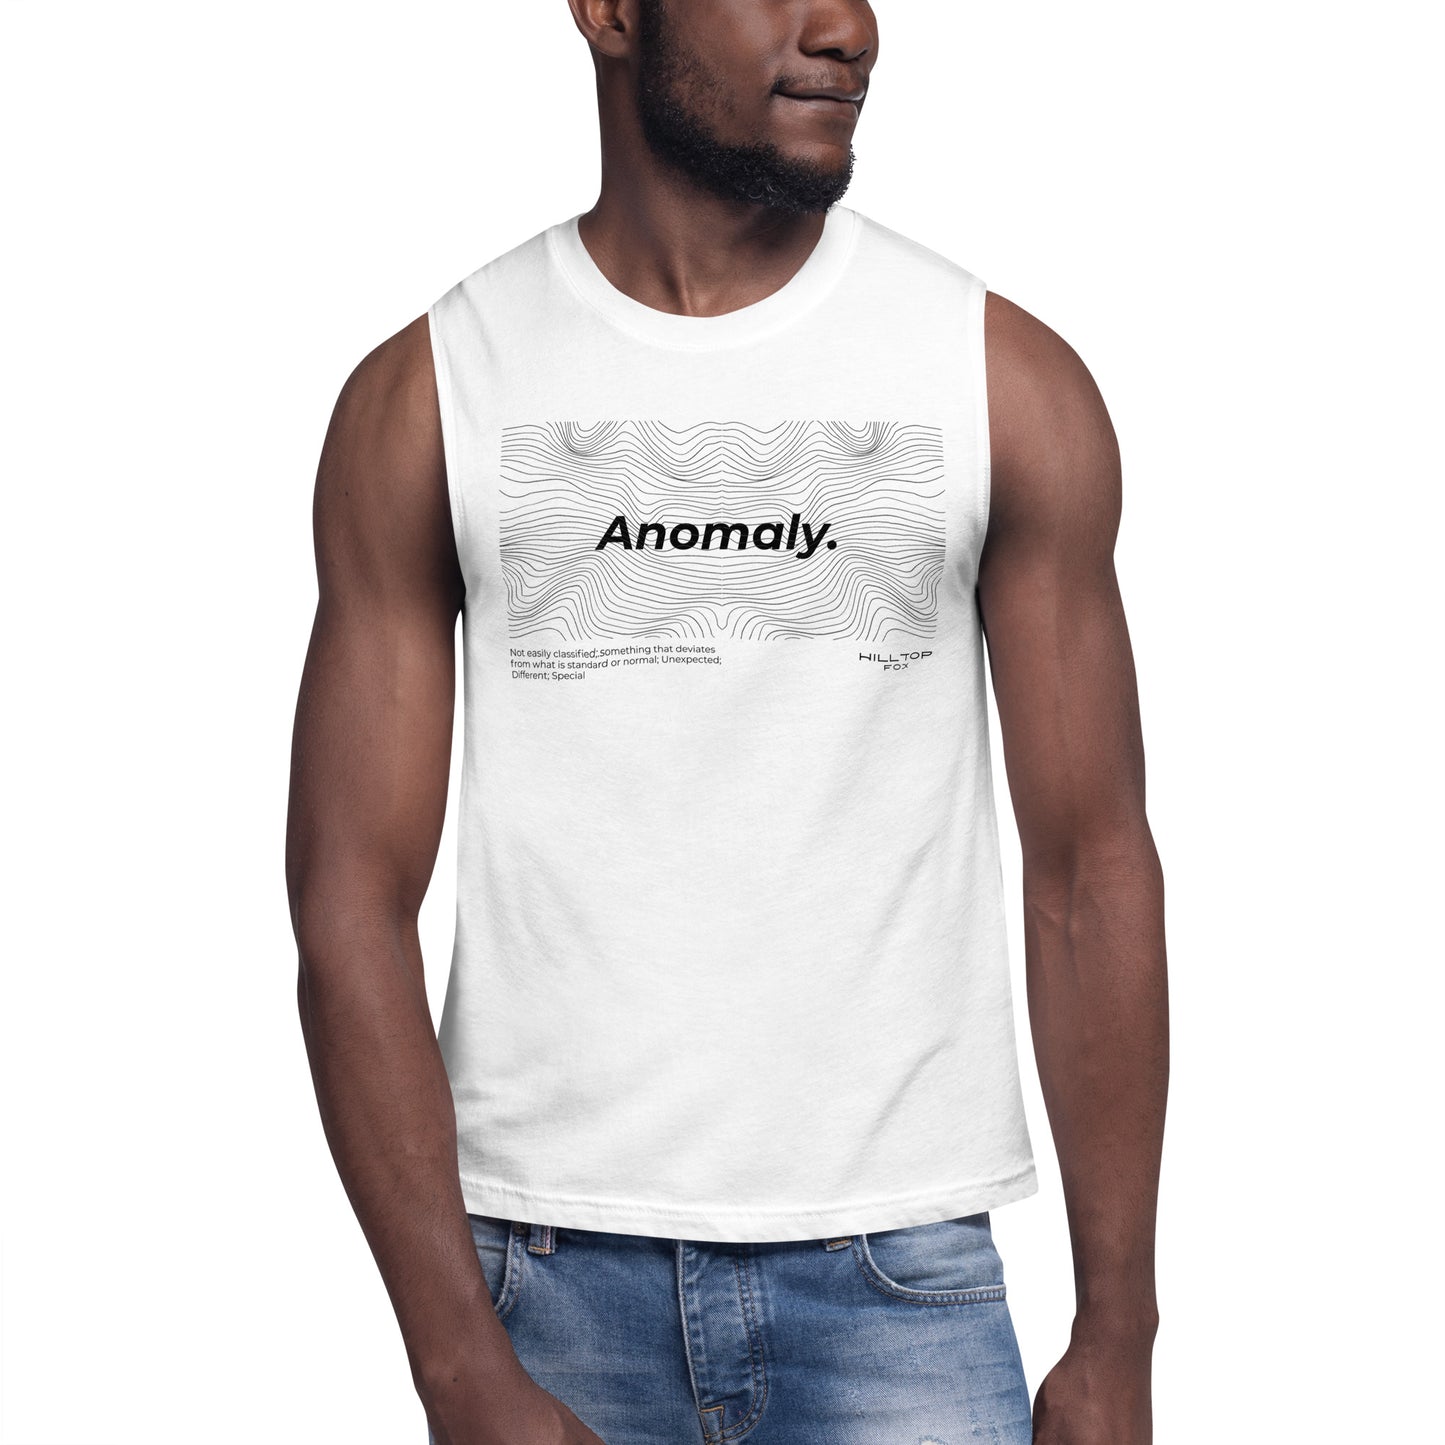 Chemise musculaire d’anomalie